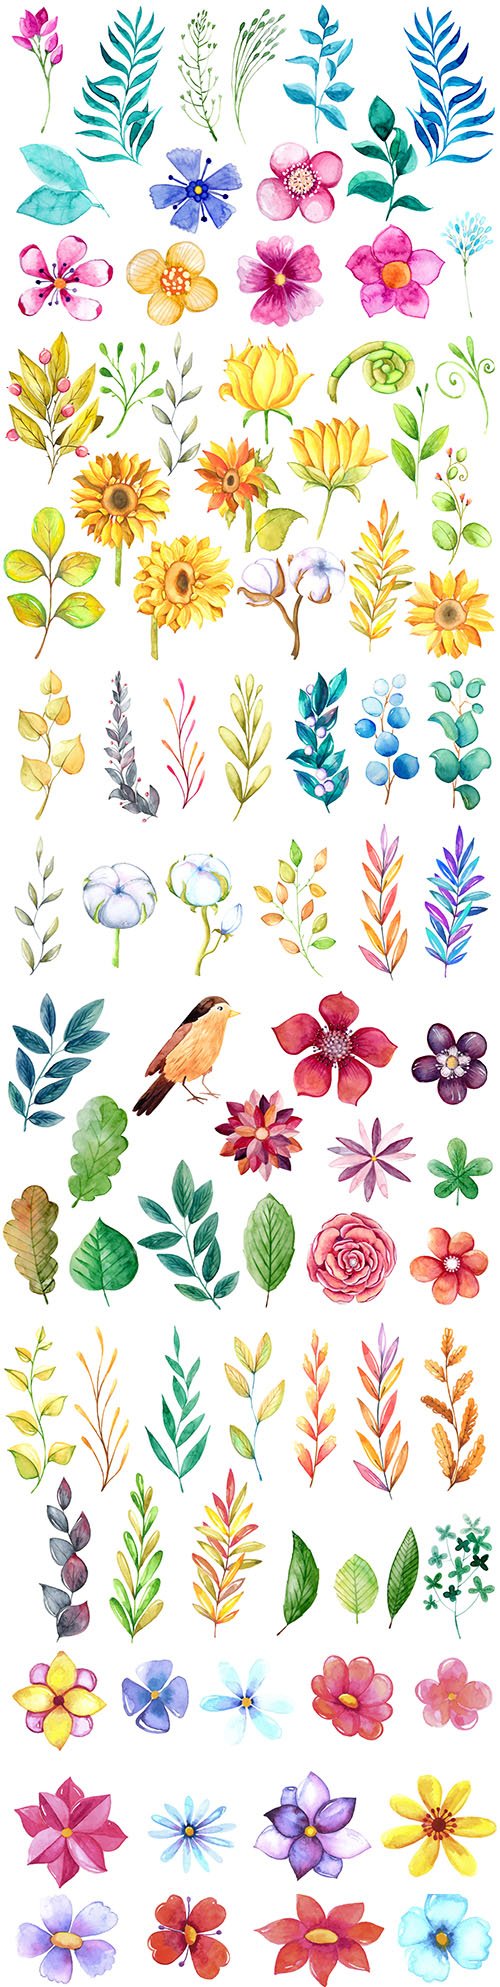 Watercolour collection flowers, leaves and branches